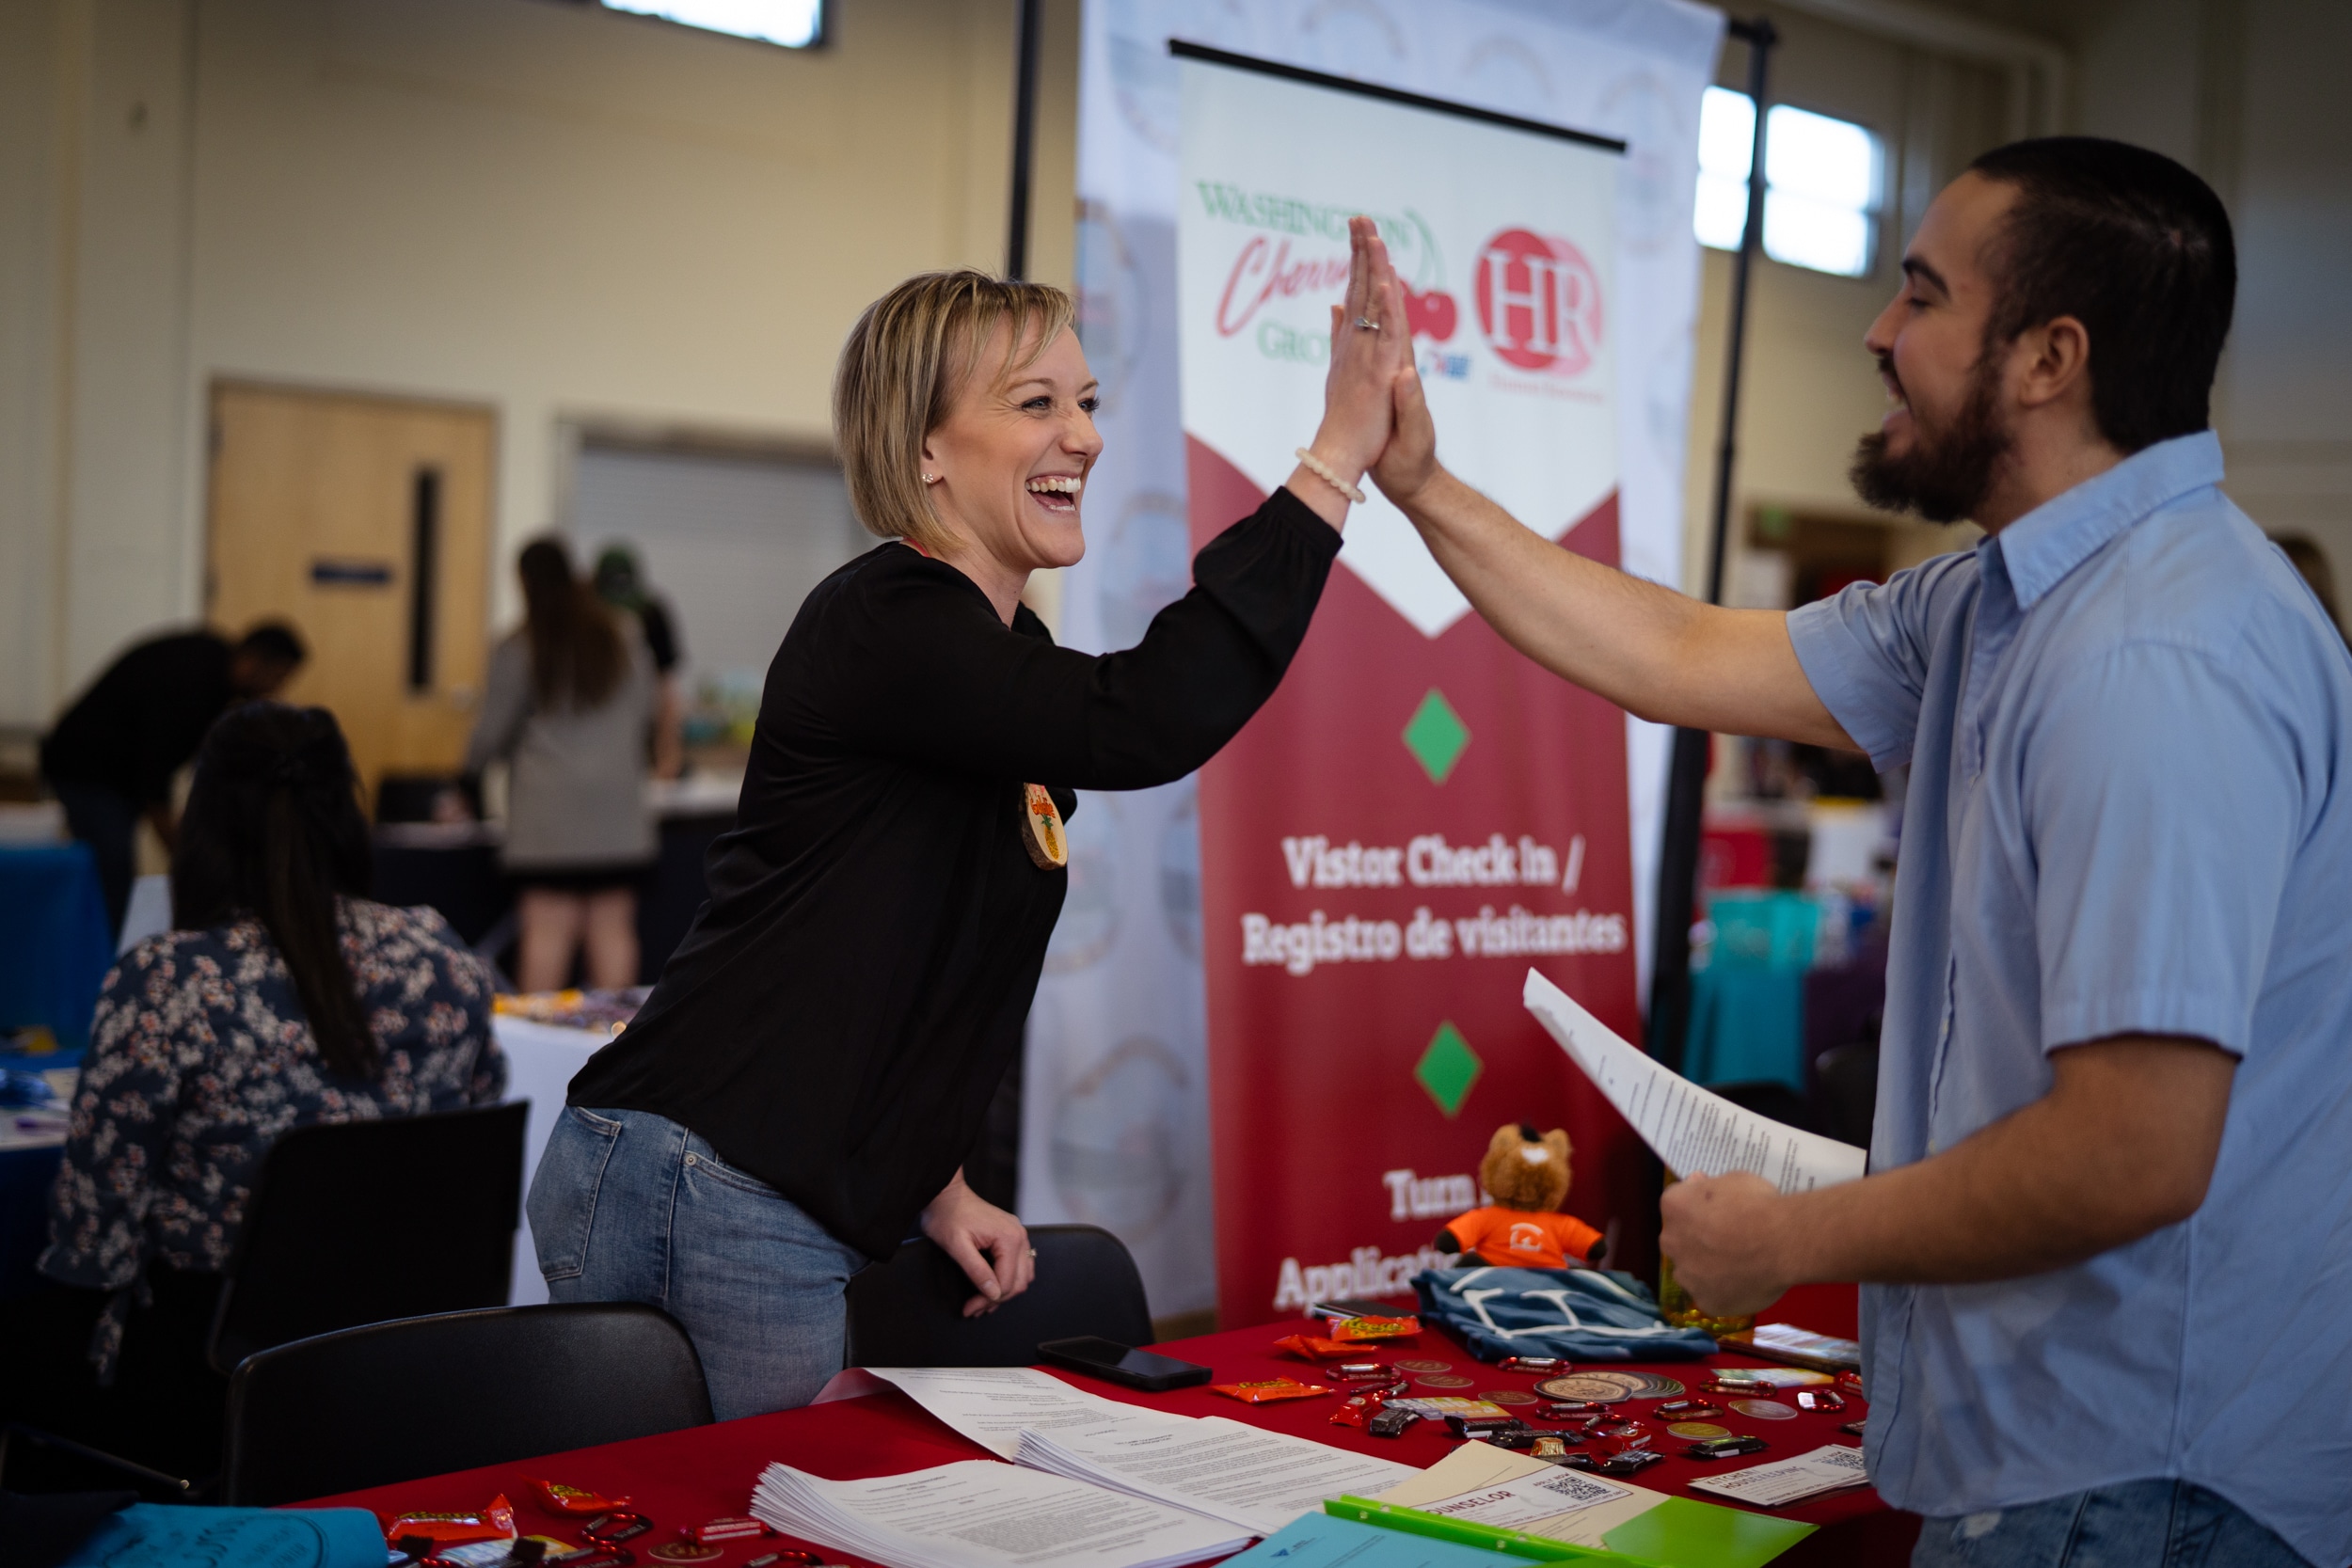 Career Connections Shine Bright at Spring Into Summer Hiring Event